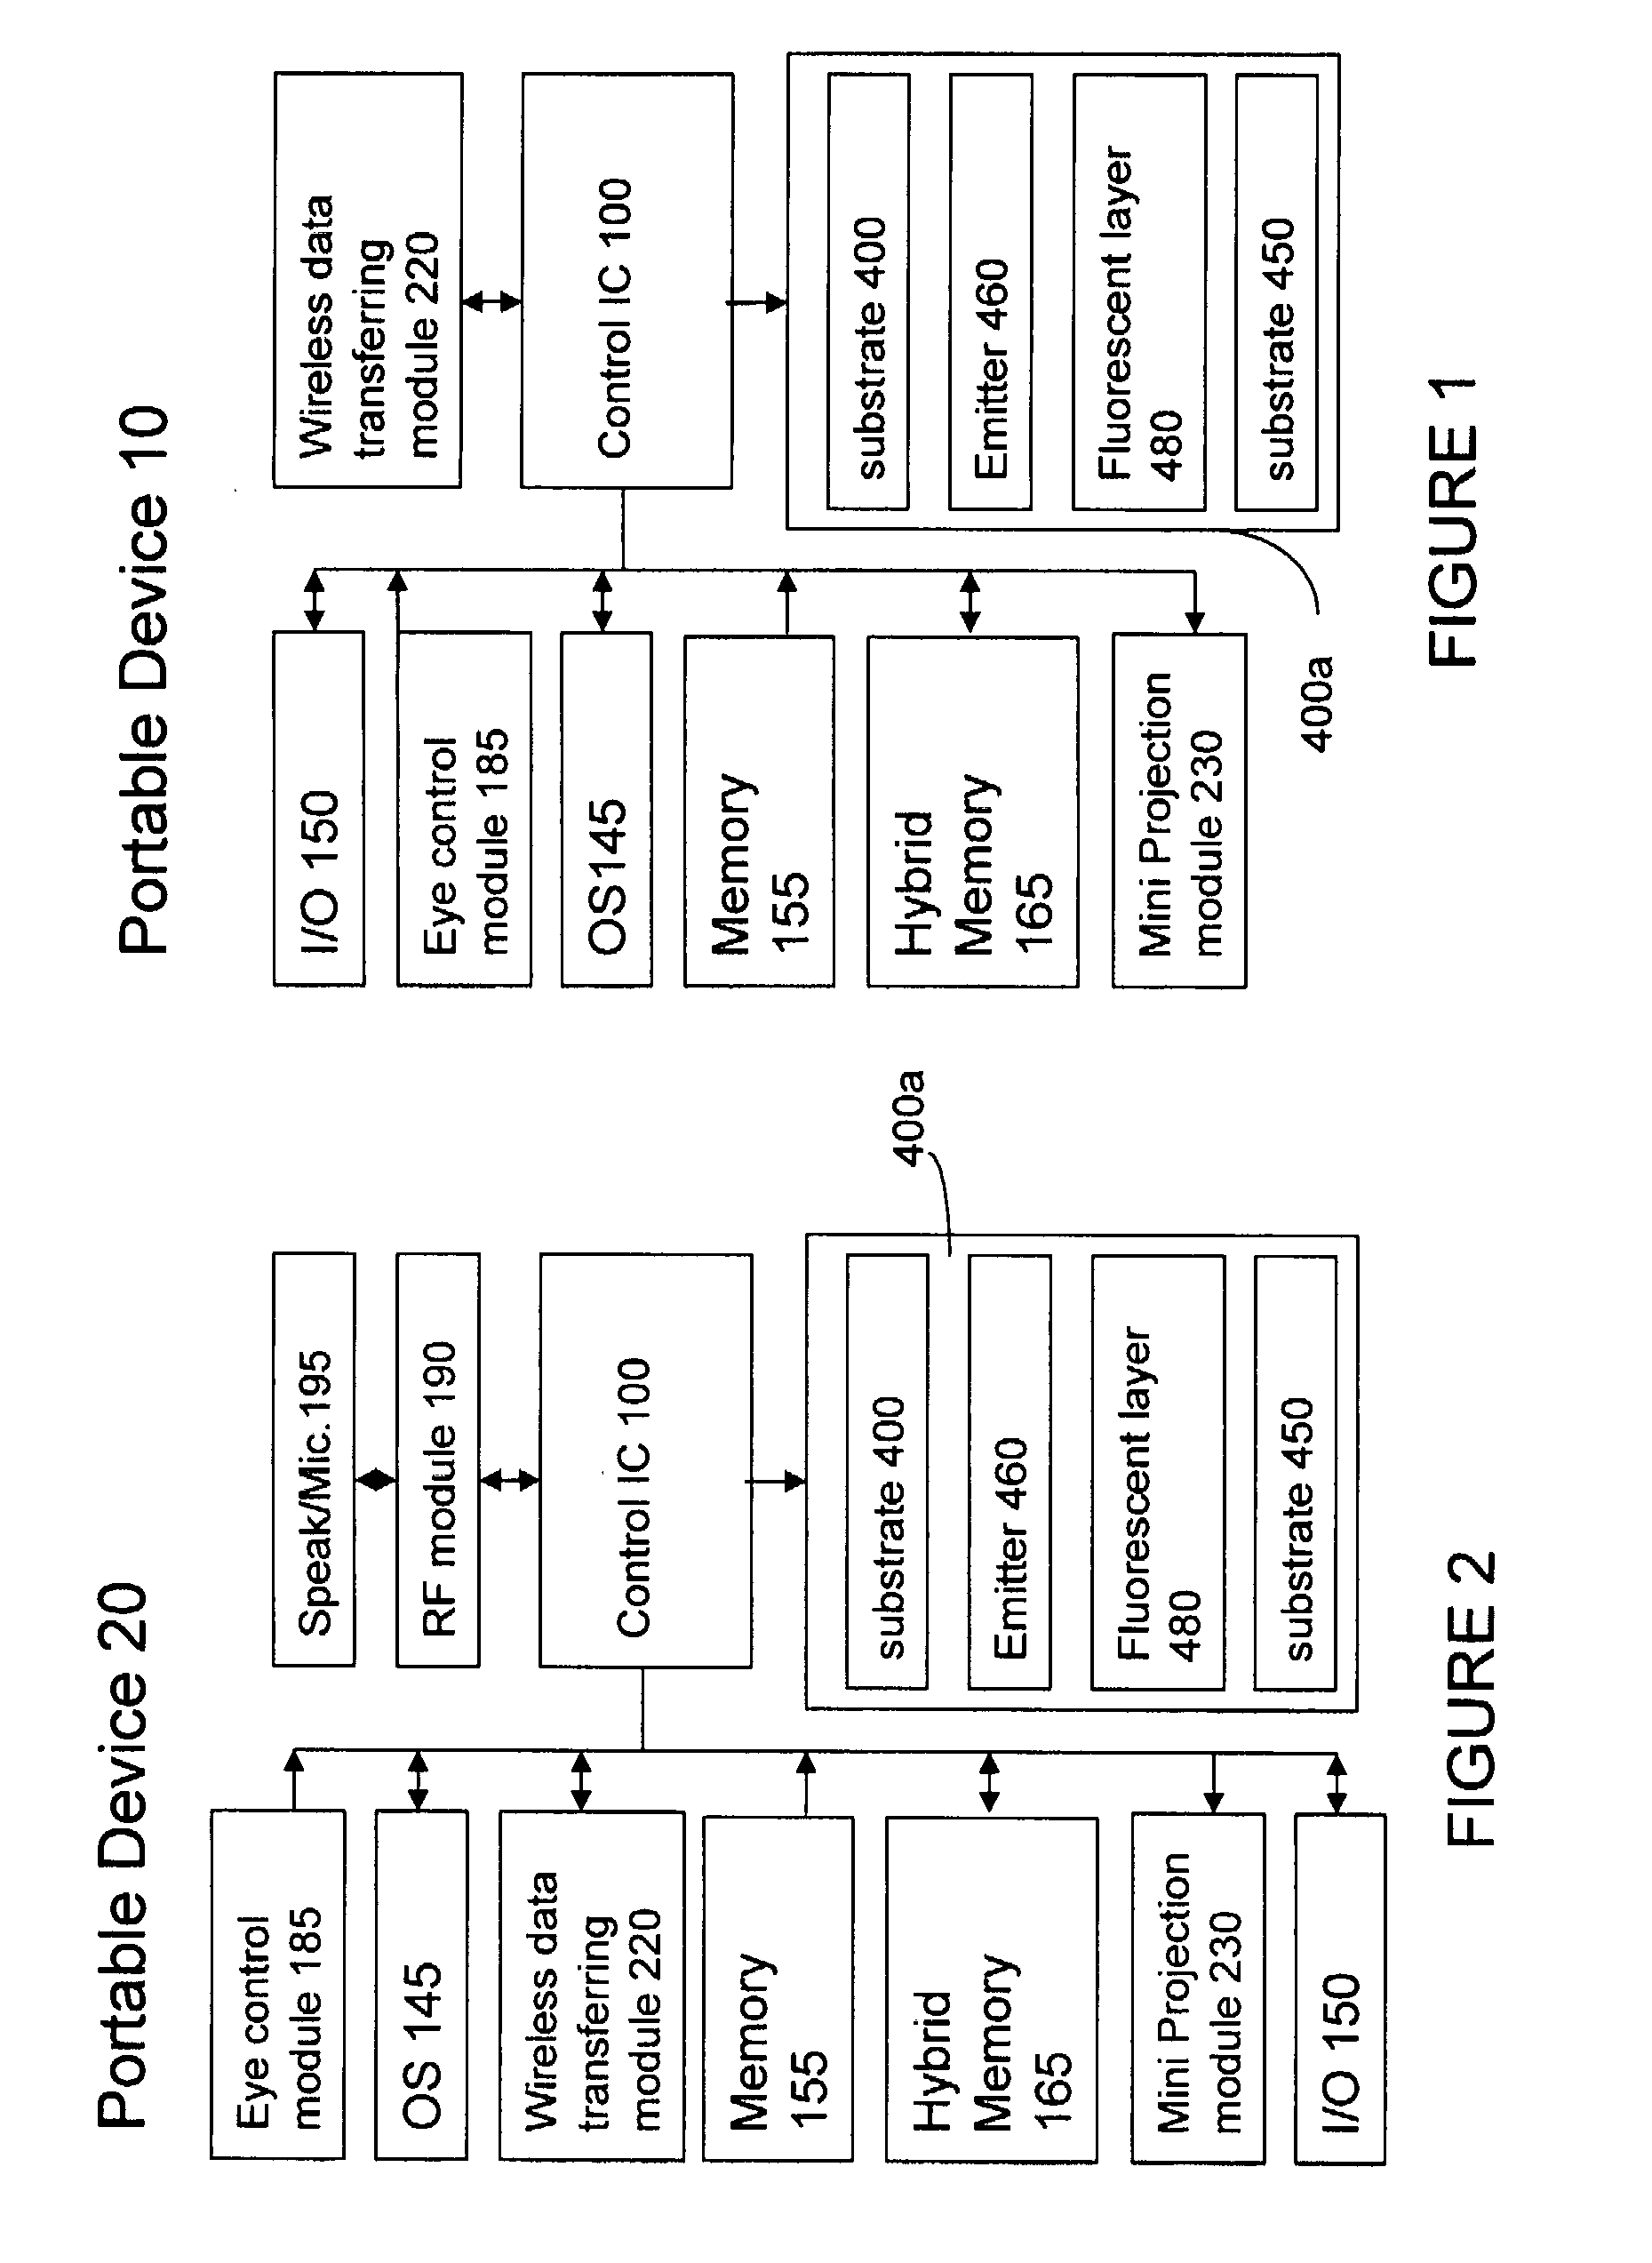 Advanced computing device with hybrid memory and eye control module